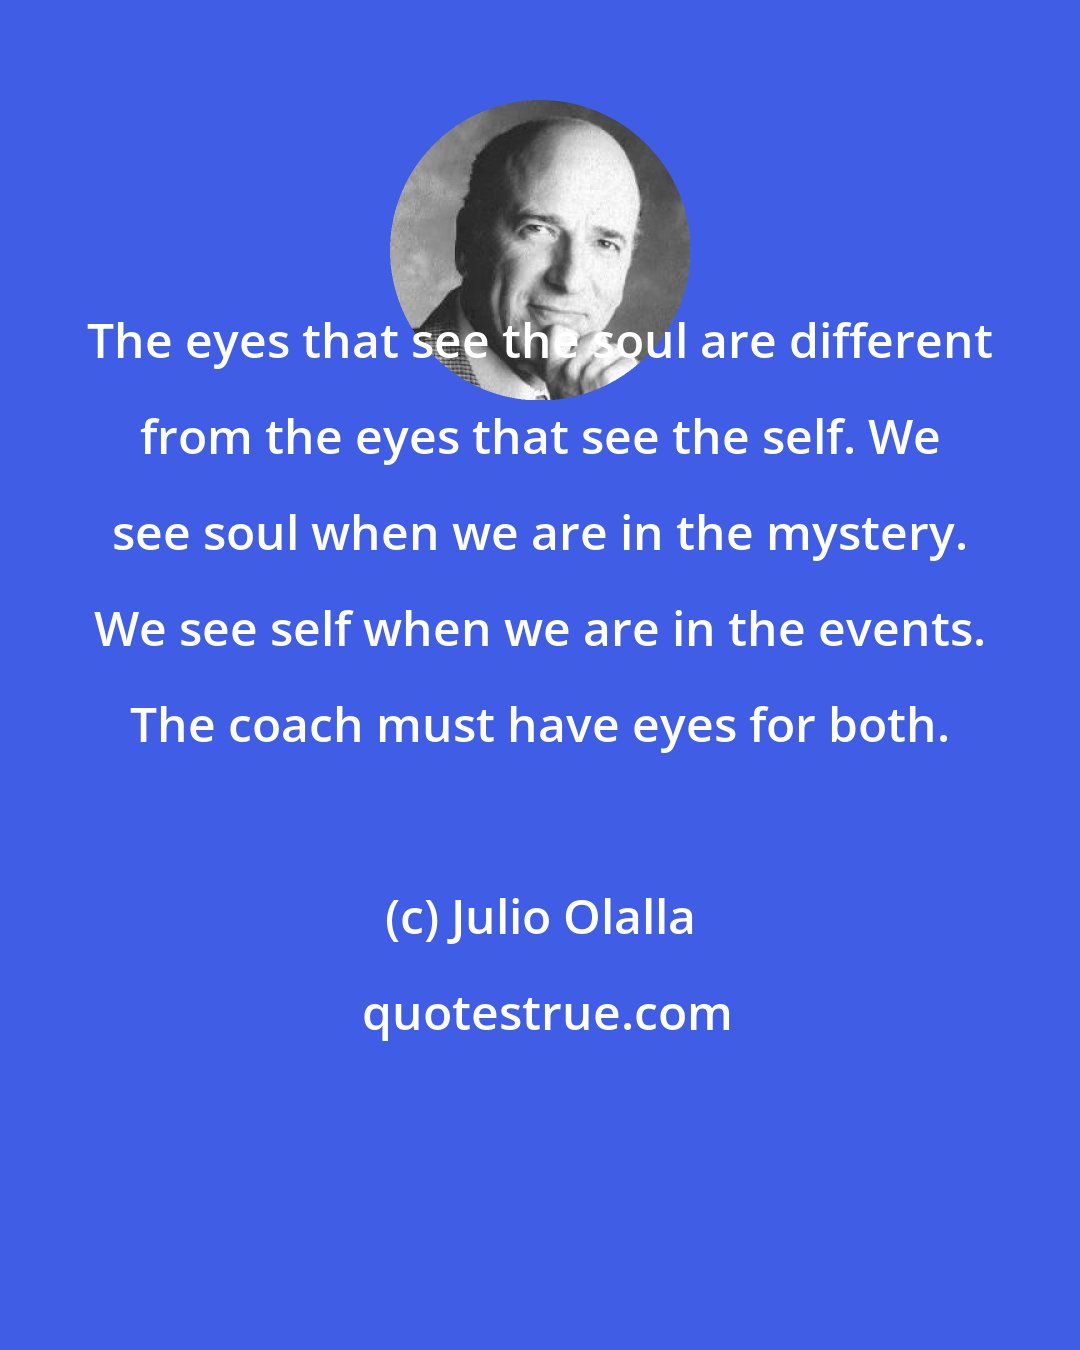 Julio Olalla: The eyes that see the soul are different from the eyes that see the self. We see soul when we are in the mystery. We see self when we are in the events. The coach must have eyes for both.